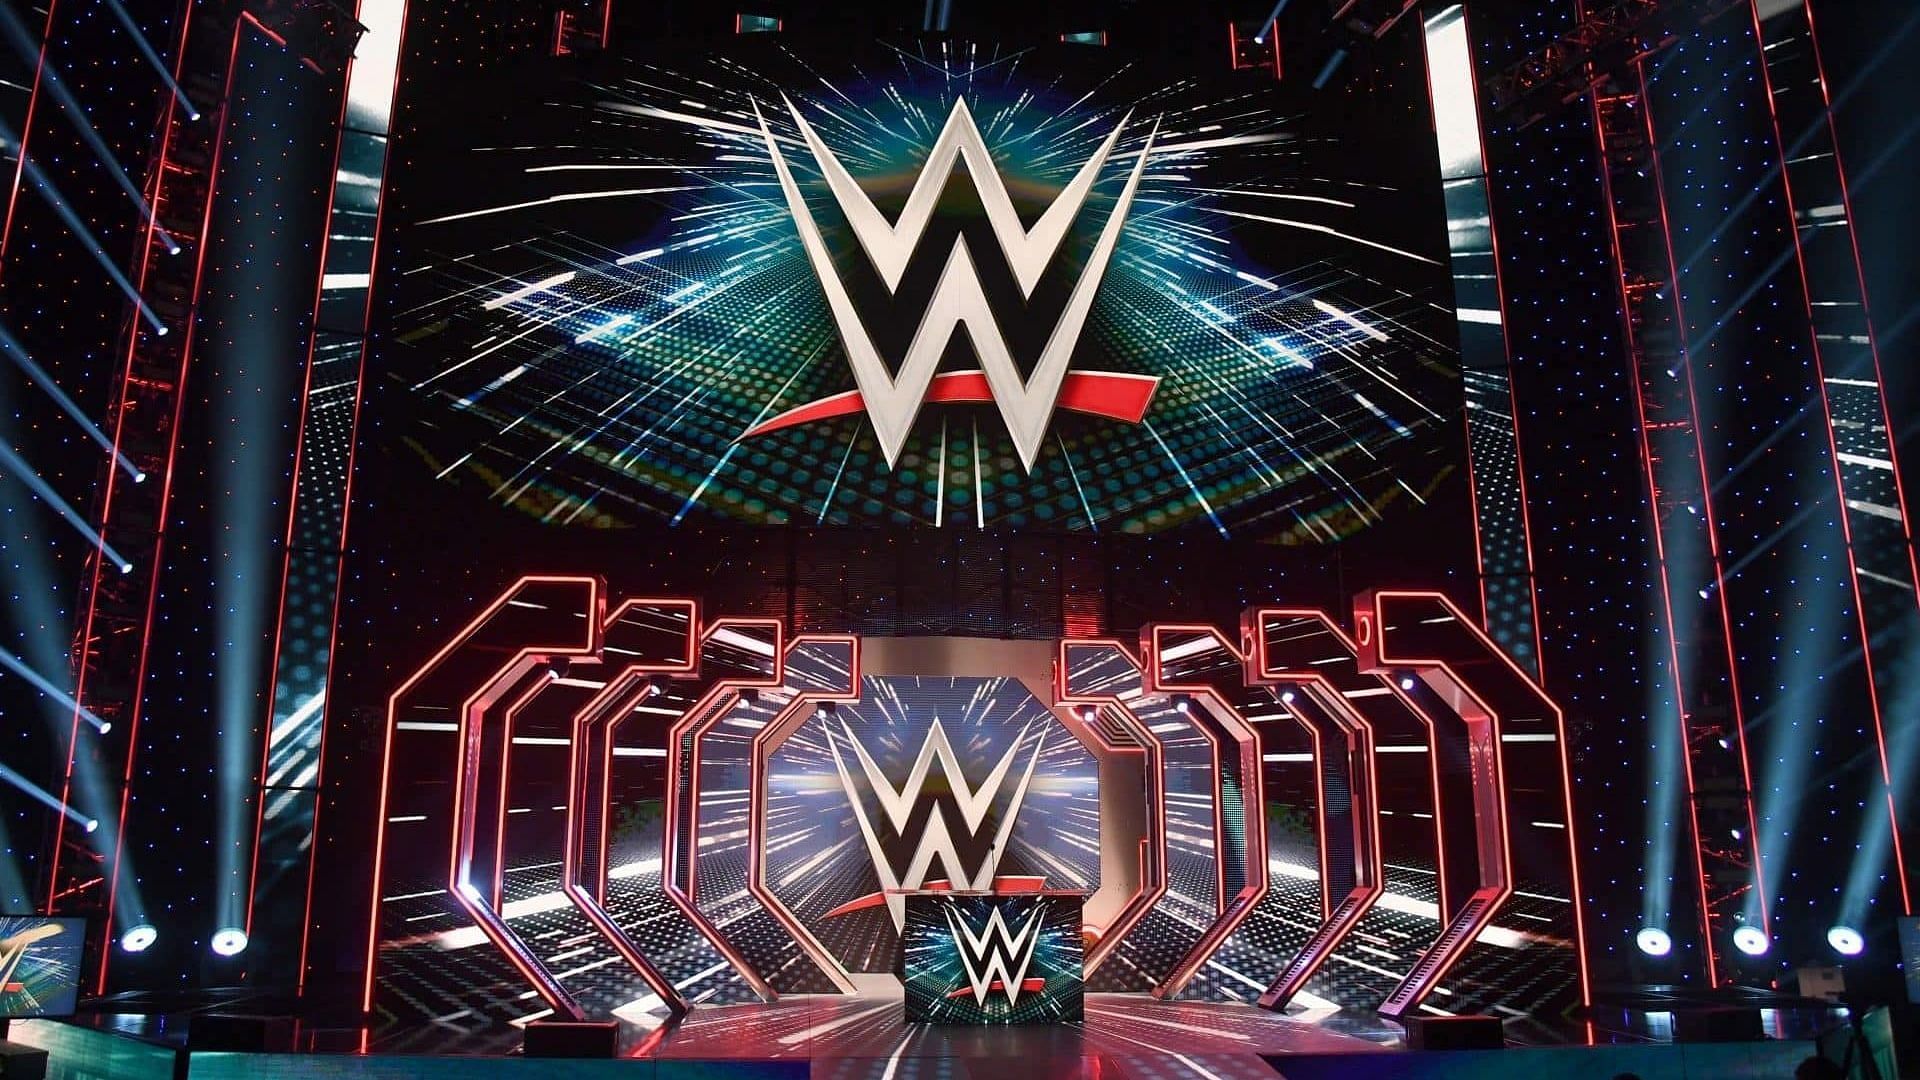 The WWE logos and stage on display inside arena